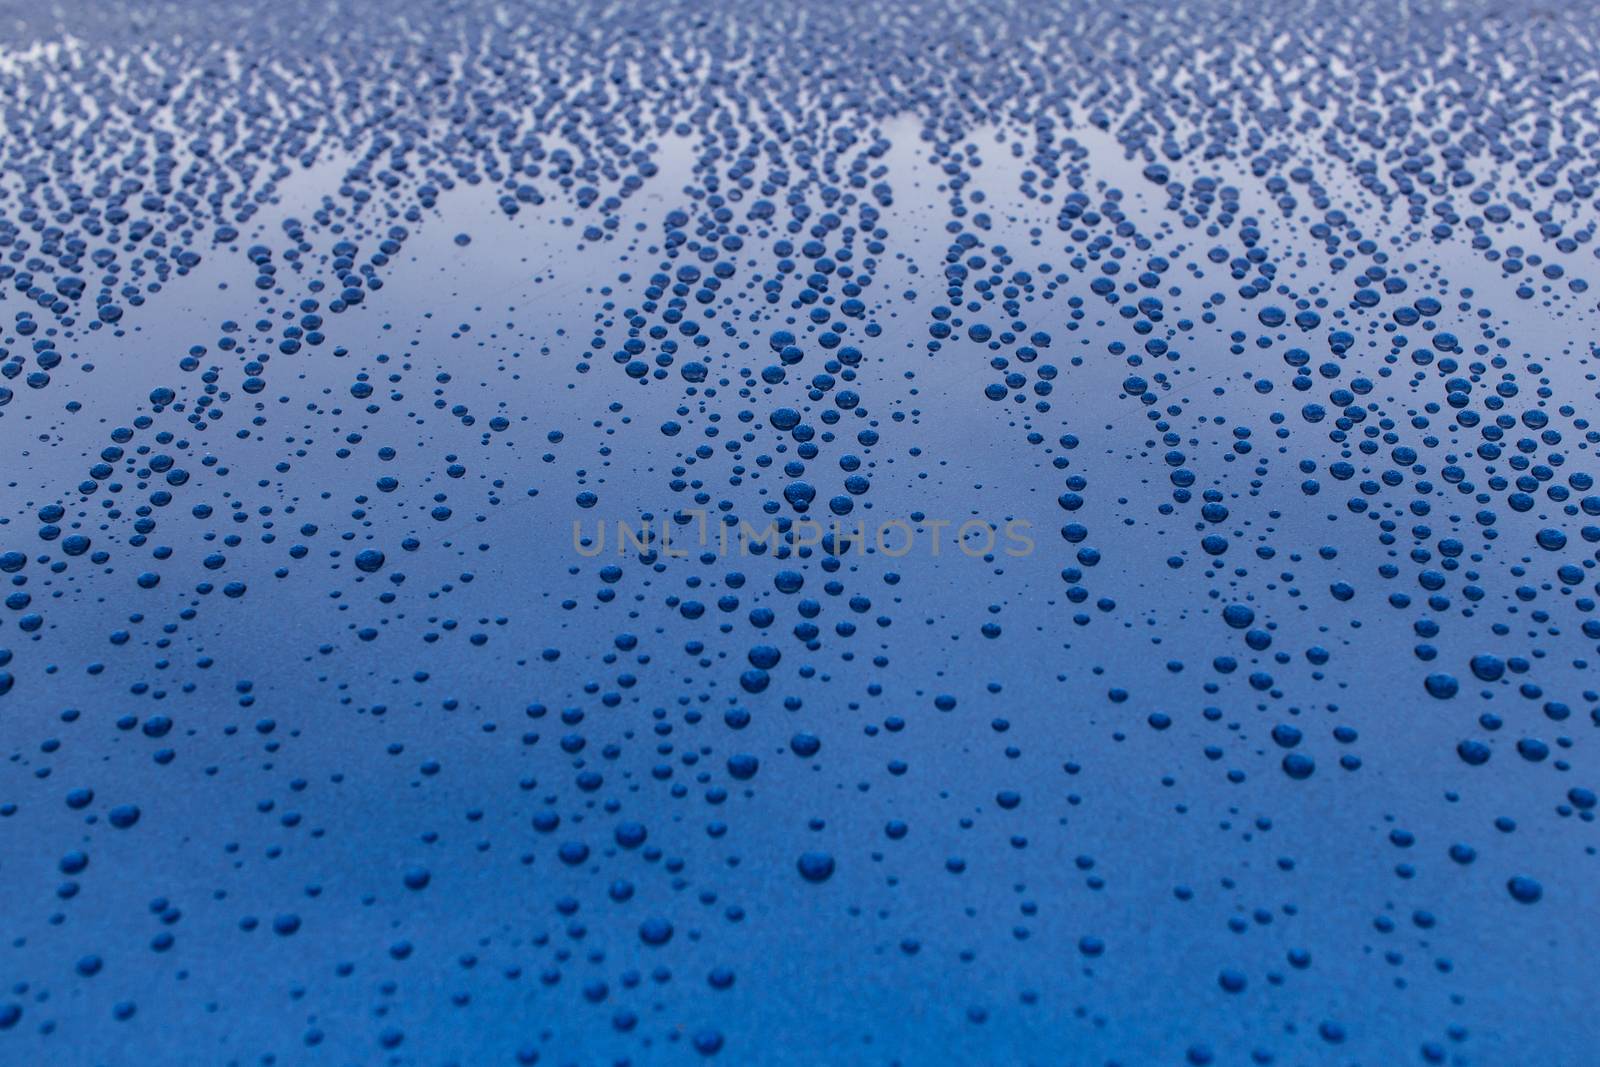 Many drops of water on a blue surface. Traces of rain on the hood of the car.